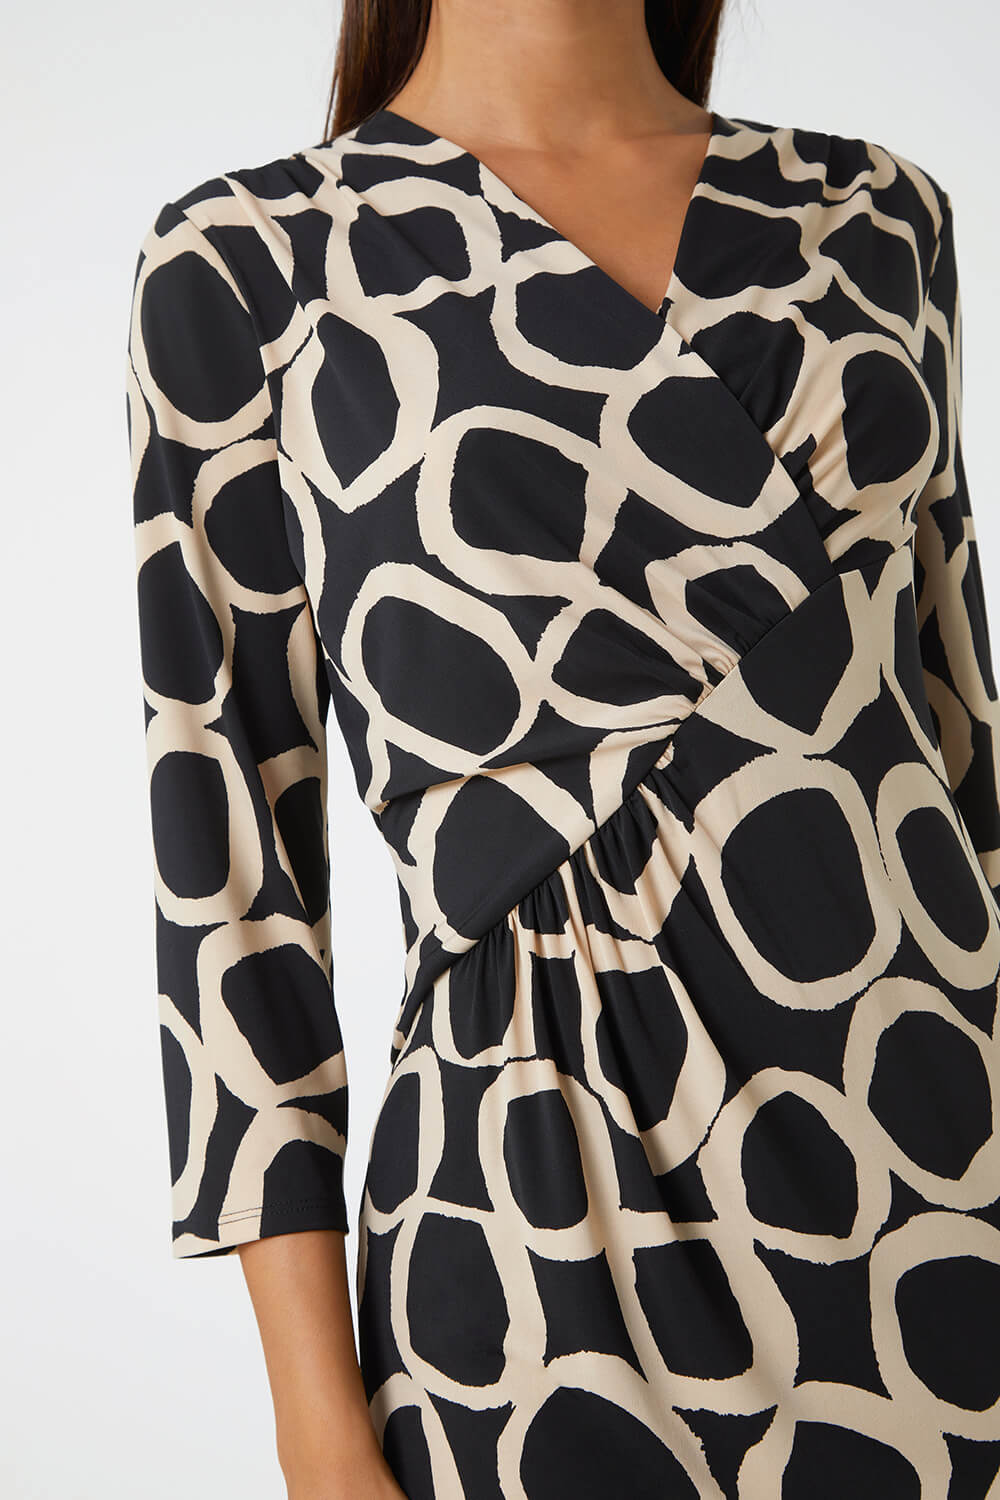 Stone Abstract Print Ruched Stretch Dress, Image 5 of 5